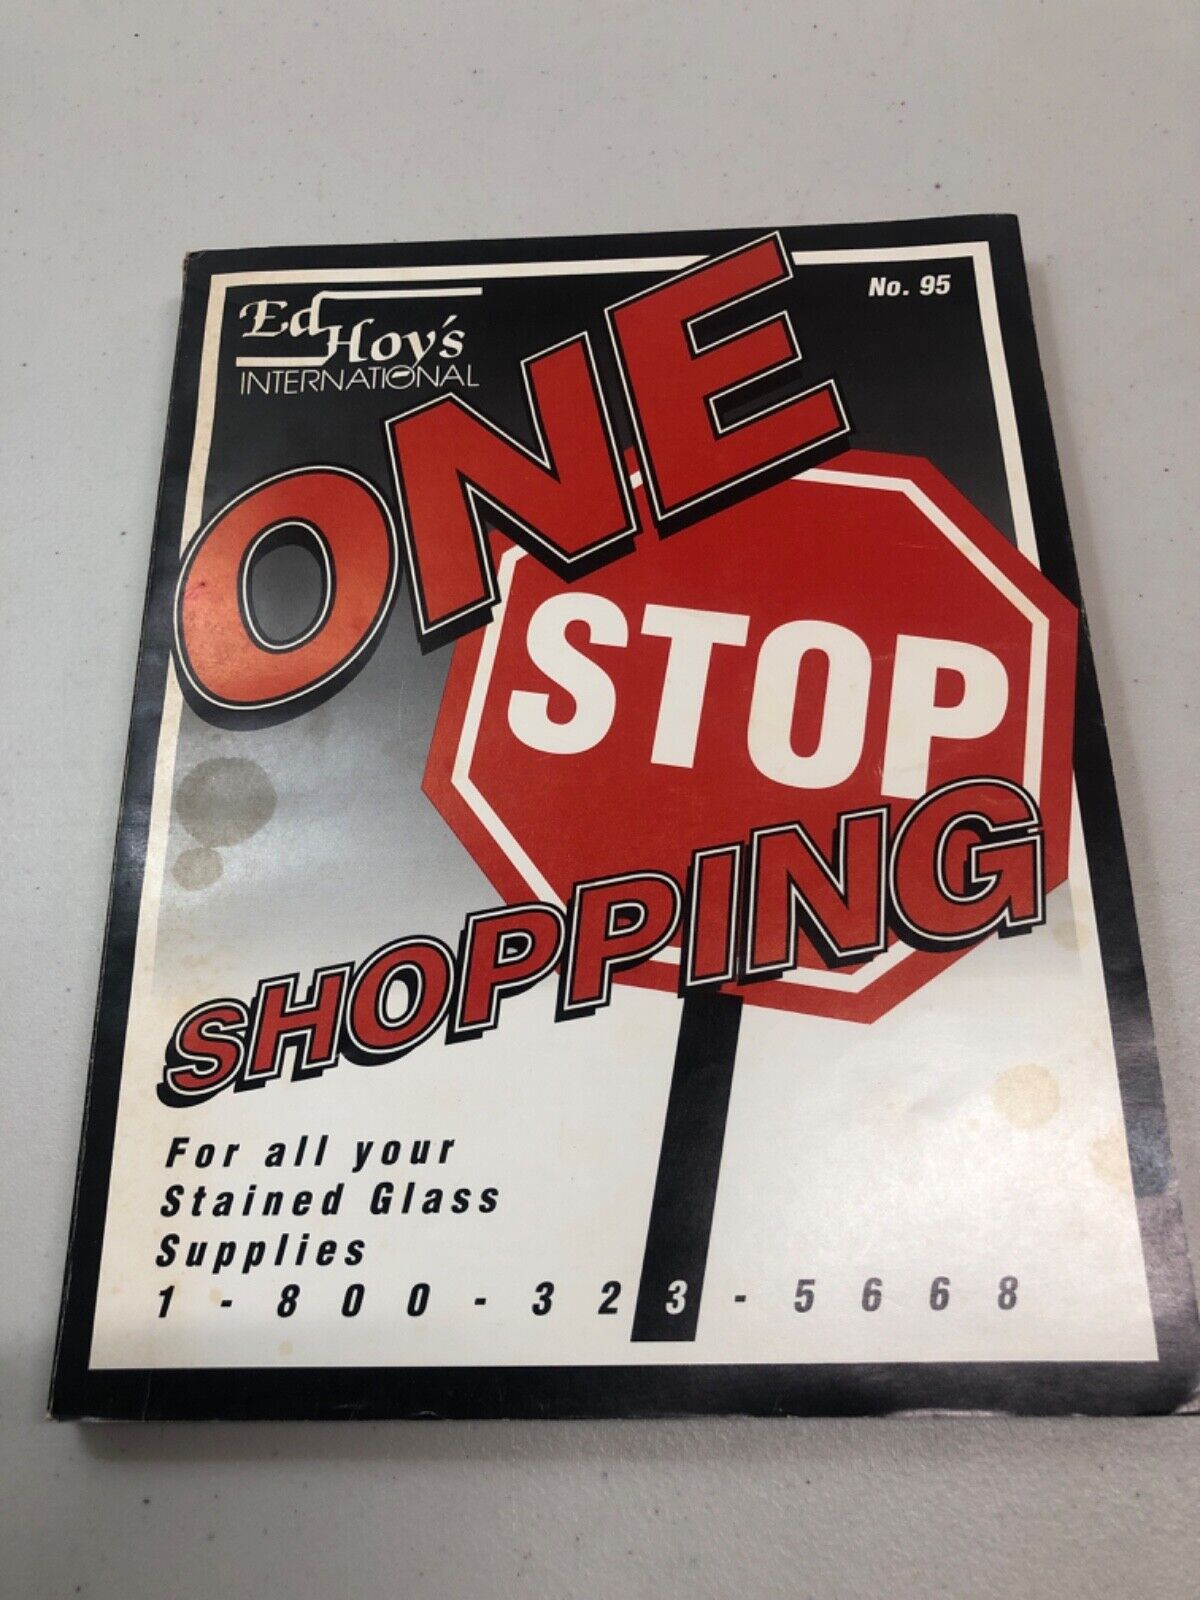 1994 Ed Hoy\'s One Stop shopping for all your Stained Glass Supplies No. 95